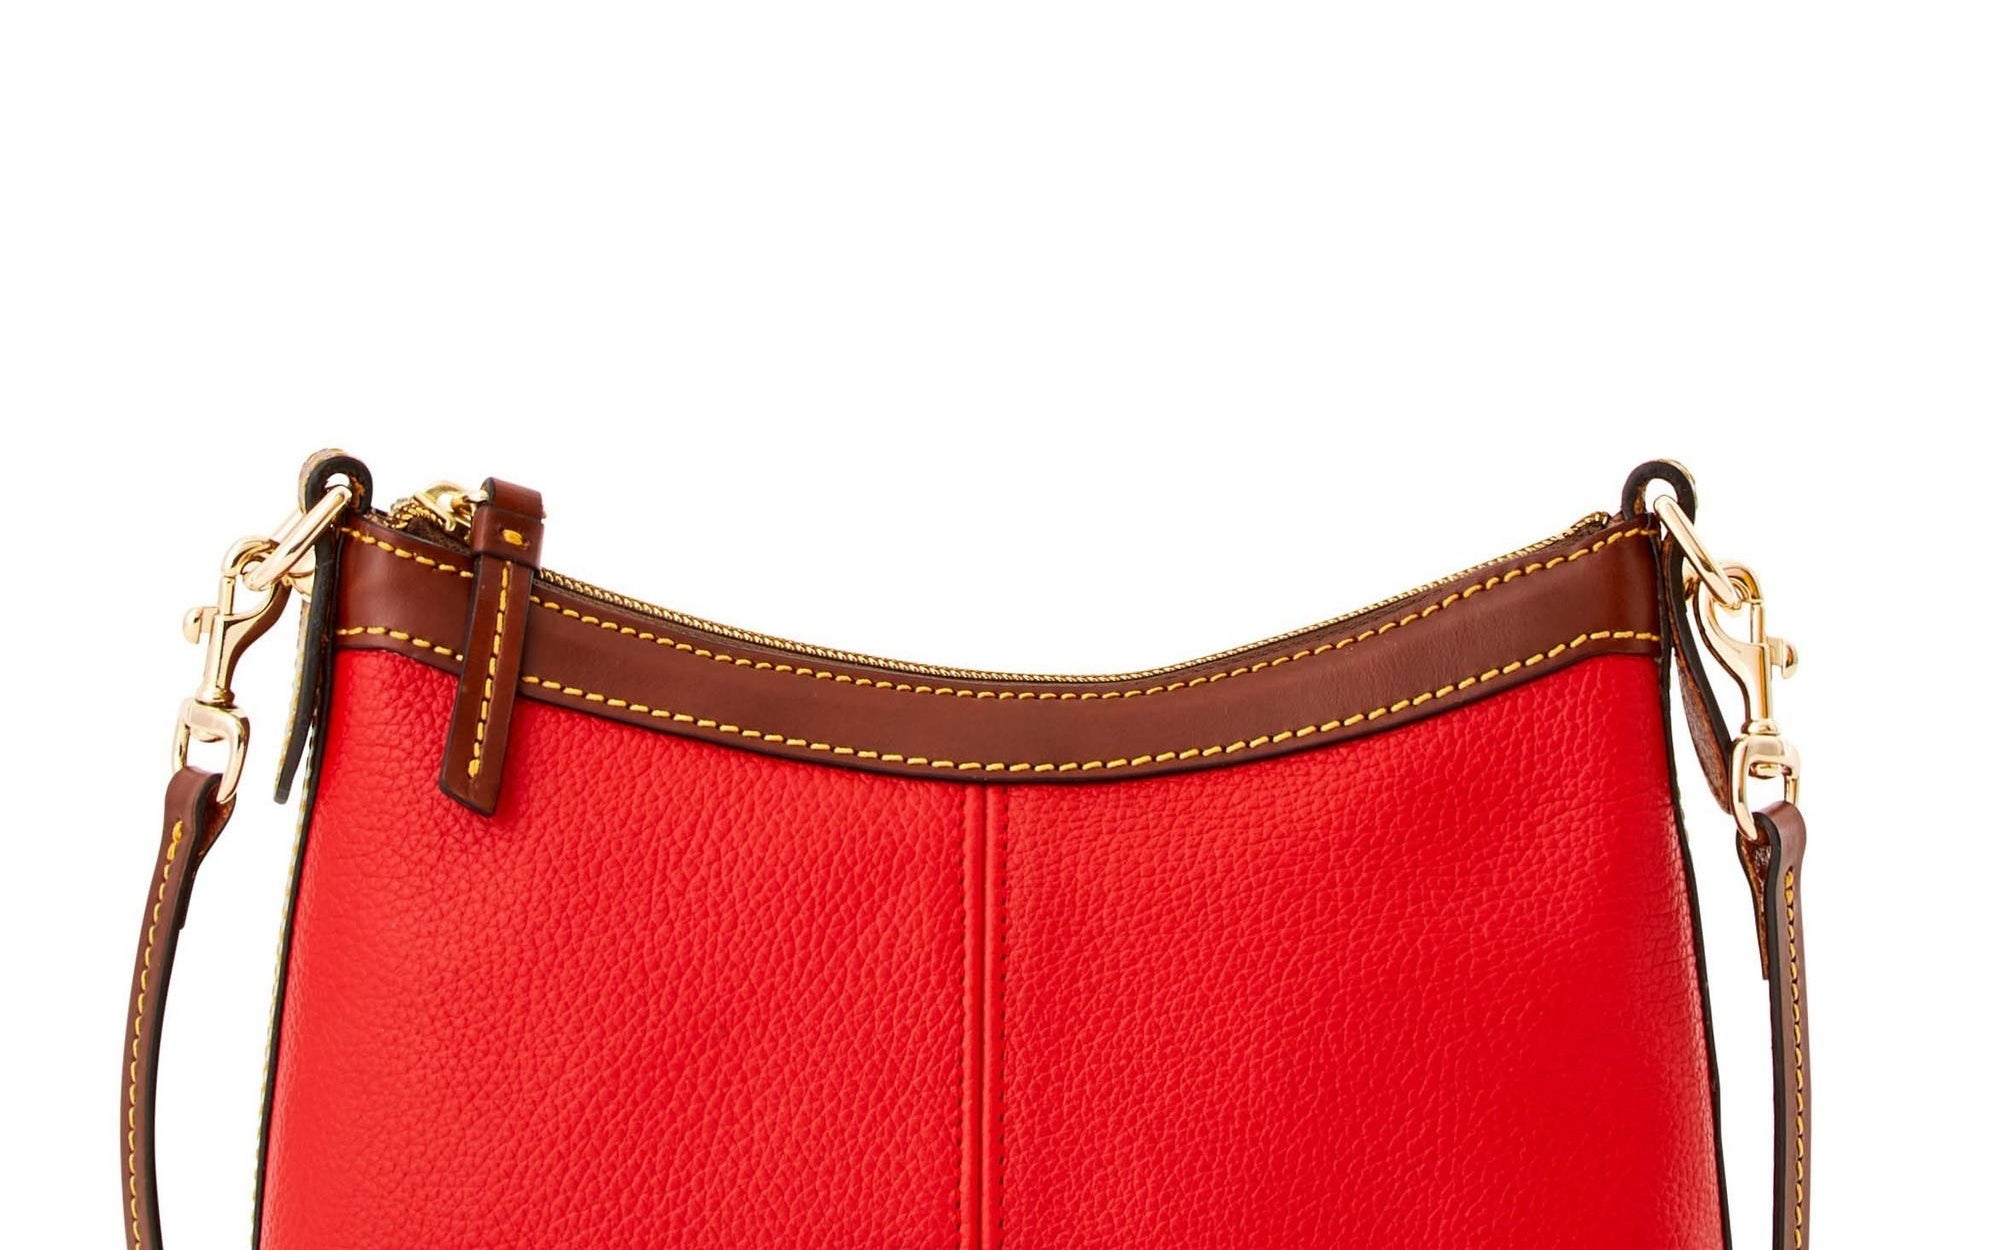 A bright red leather crossbody pouch